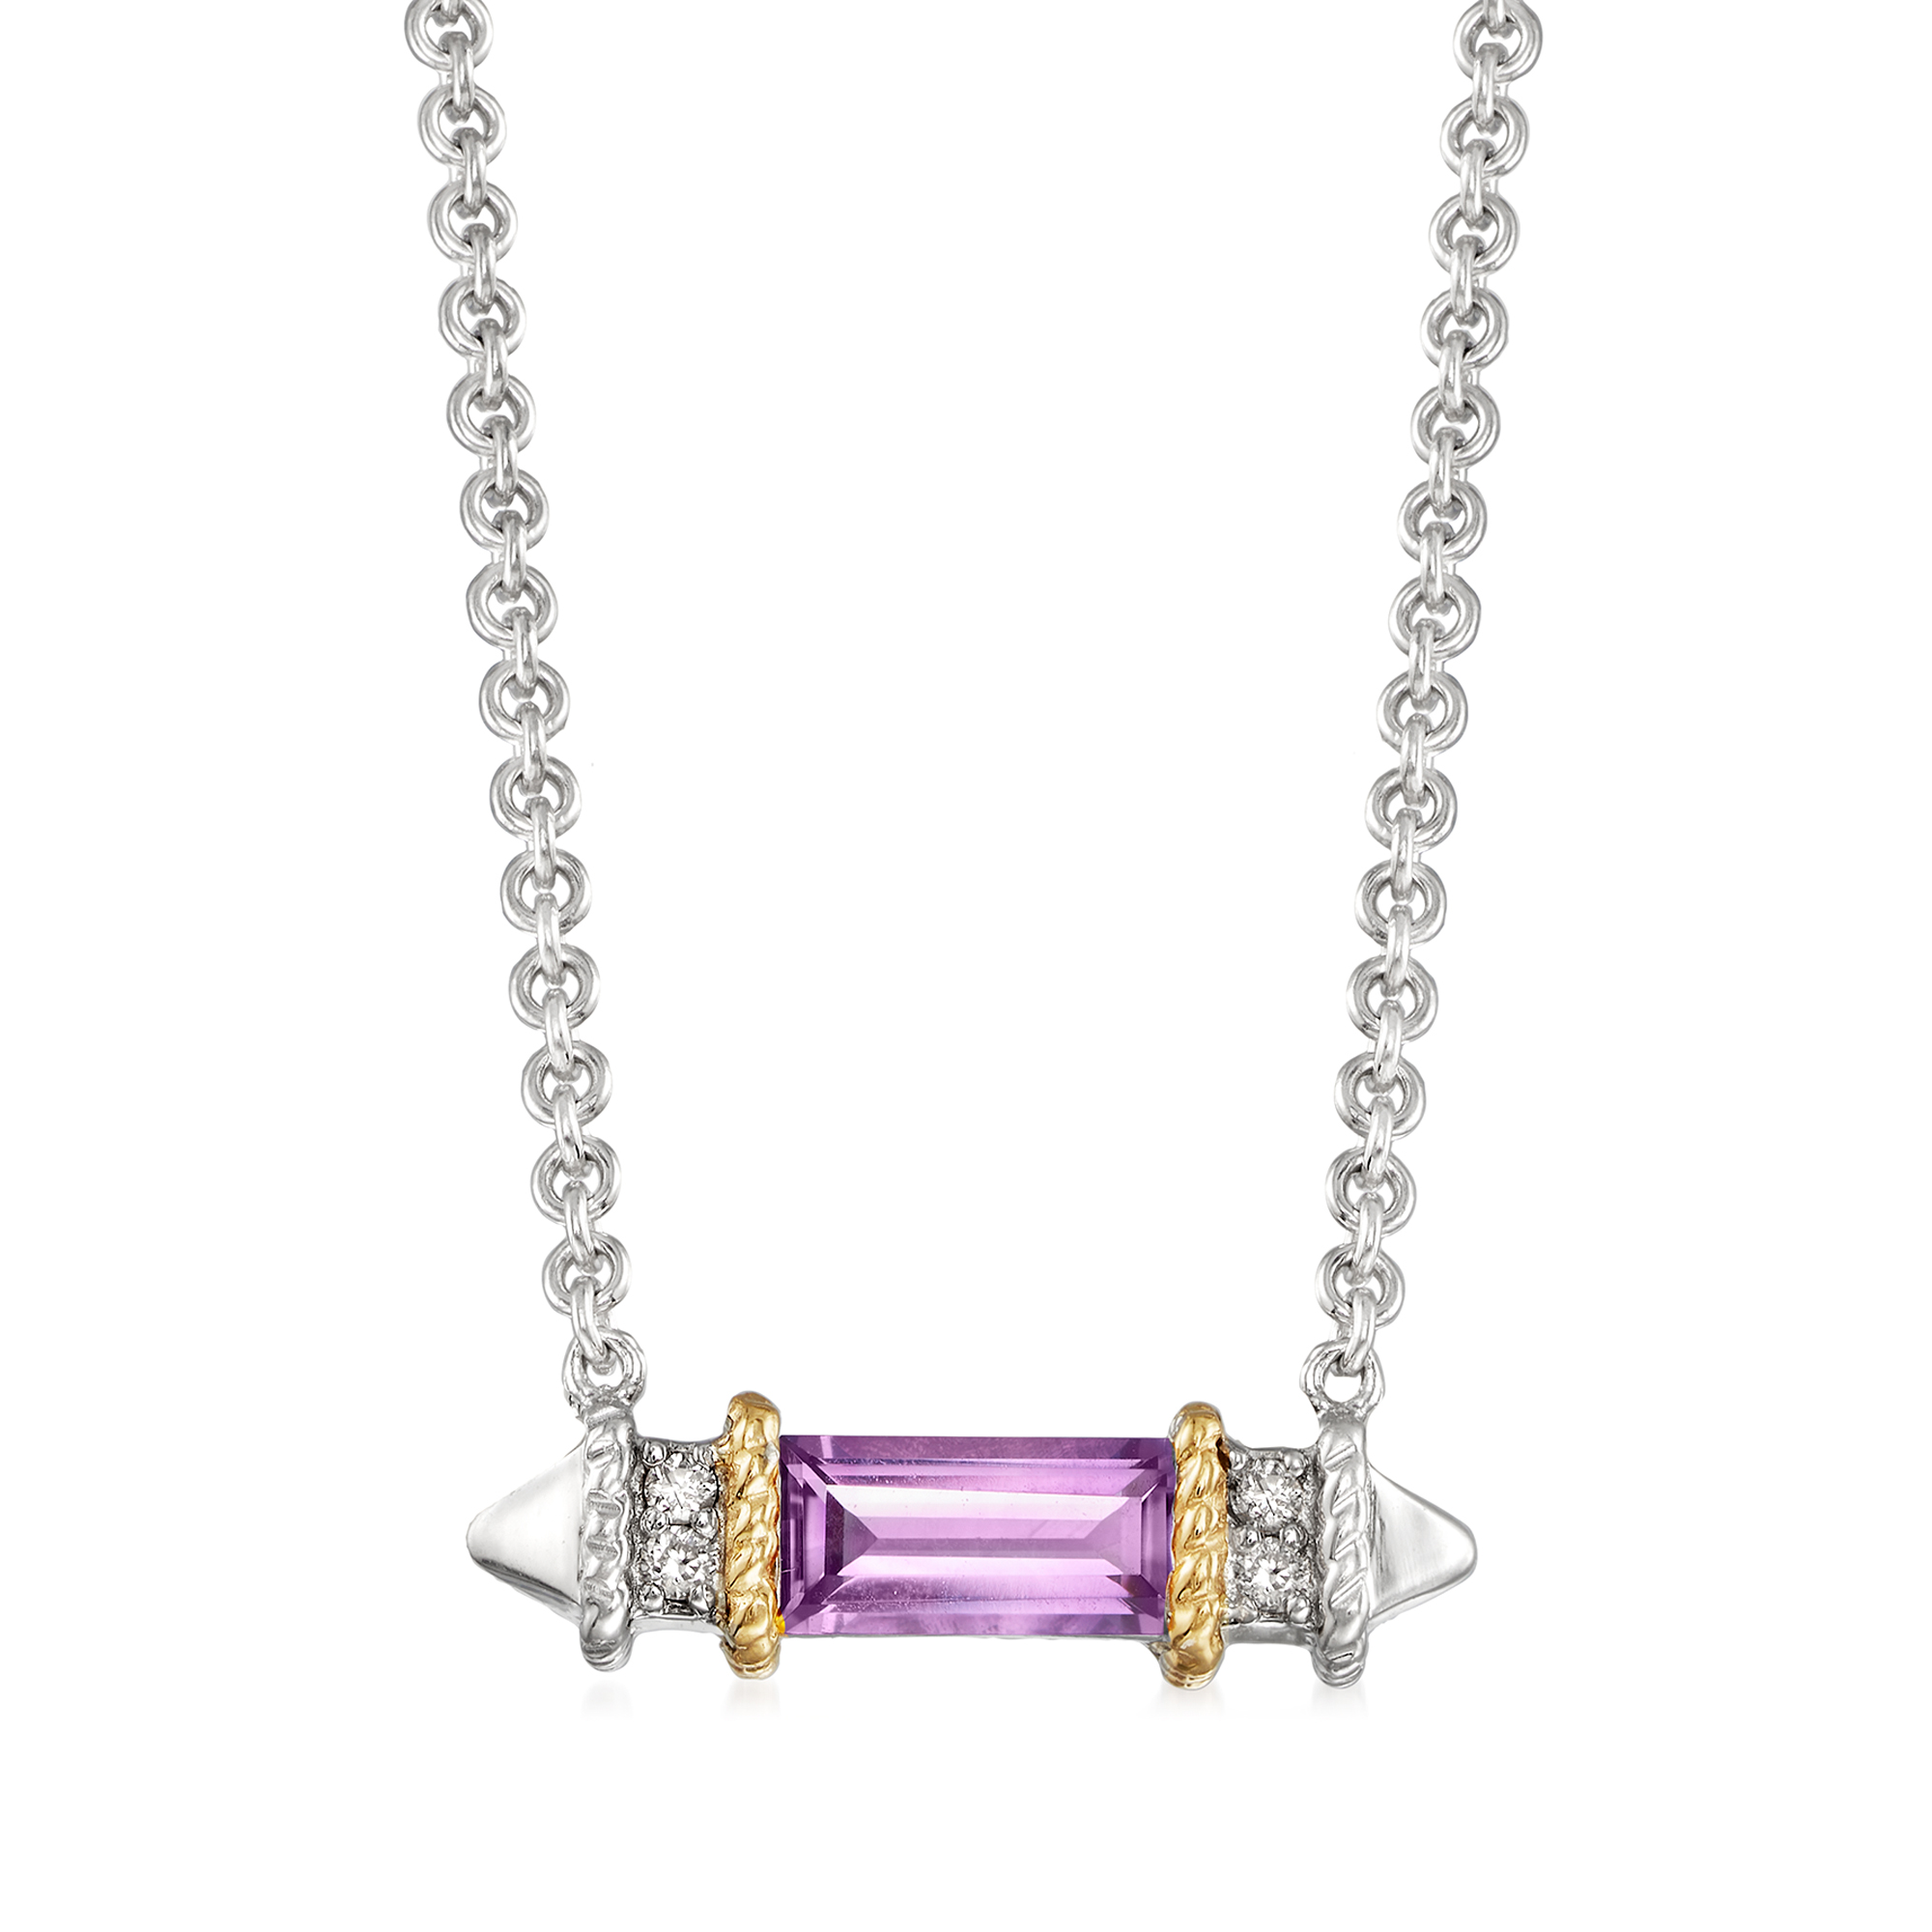 Andrea Candela "La Romana" .48 Carat Amethyst Necklace in Sterling Silver  and 18kt Yellow Gold | Ross-Simons